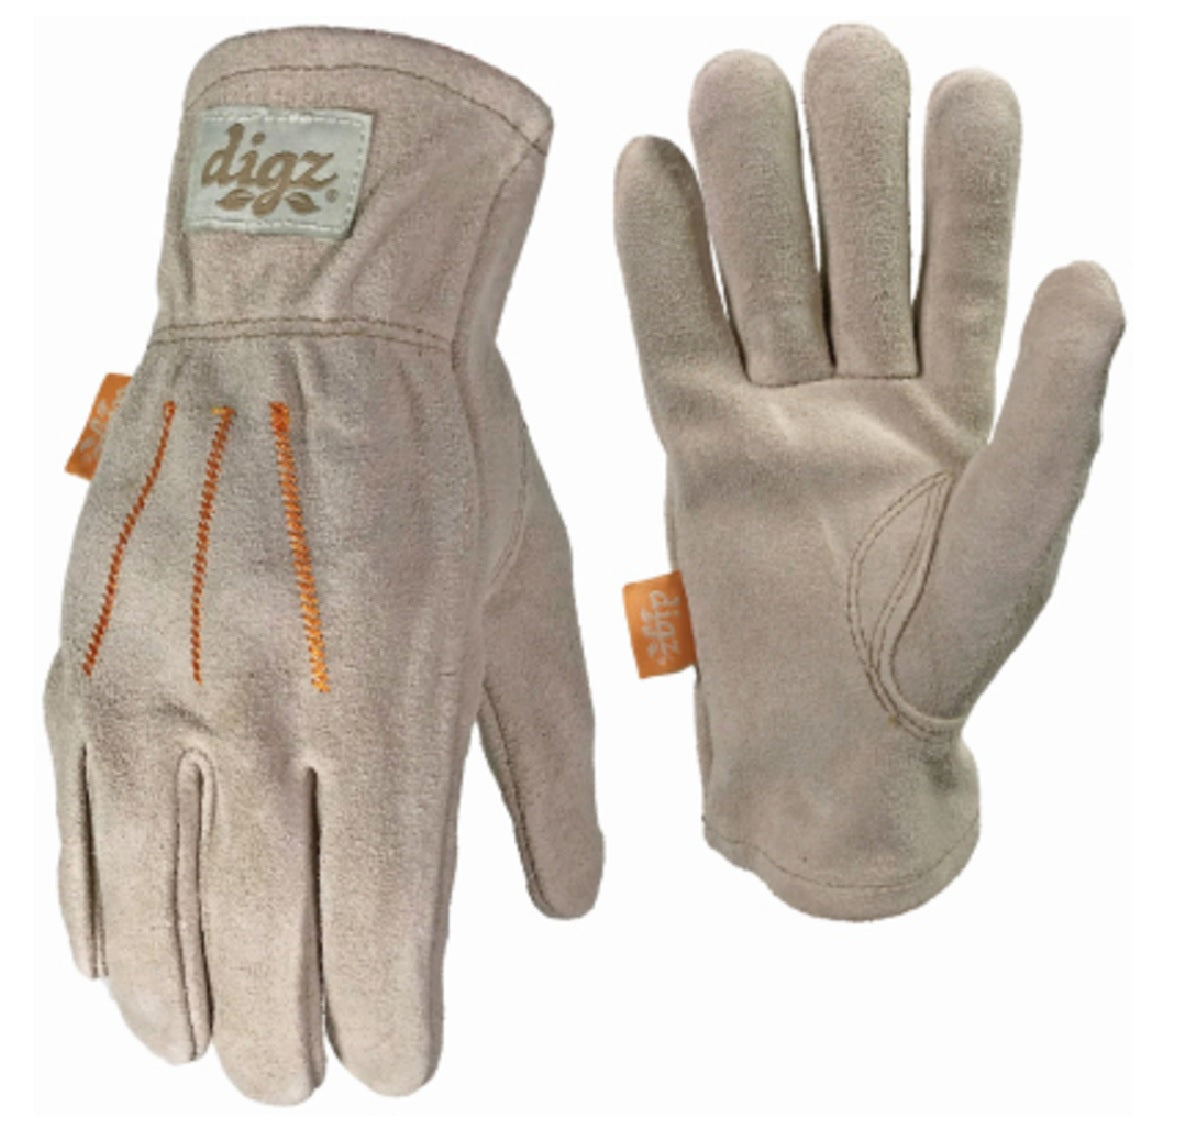 Digz 78217-26 Women's Suede Leather Palm Garden Gloves, Large